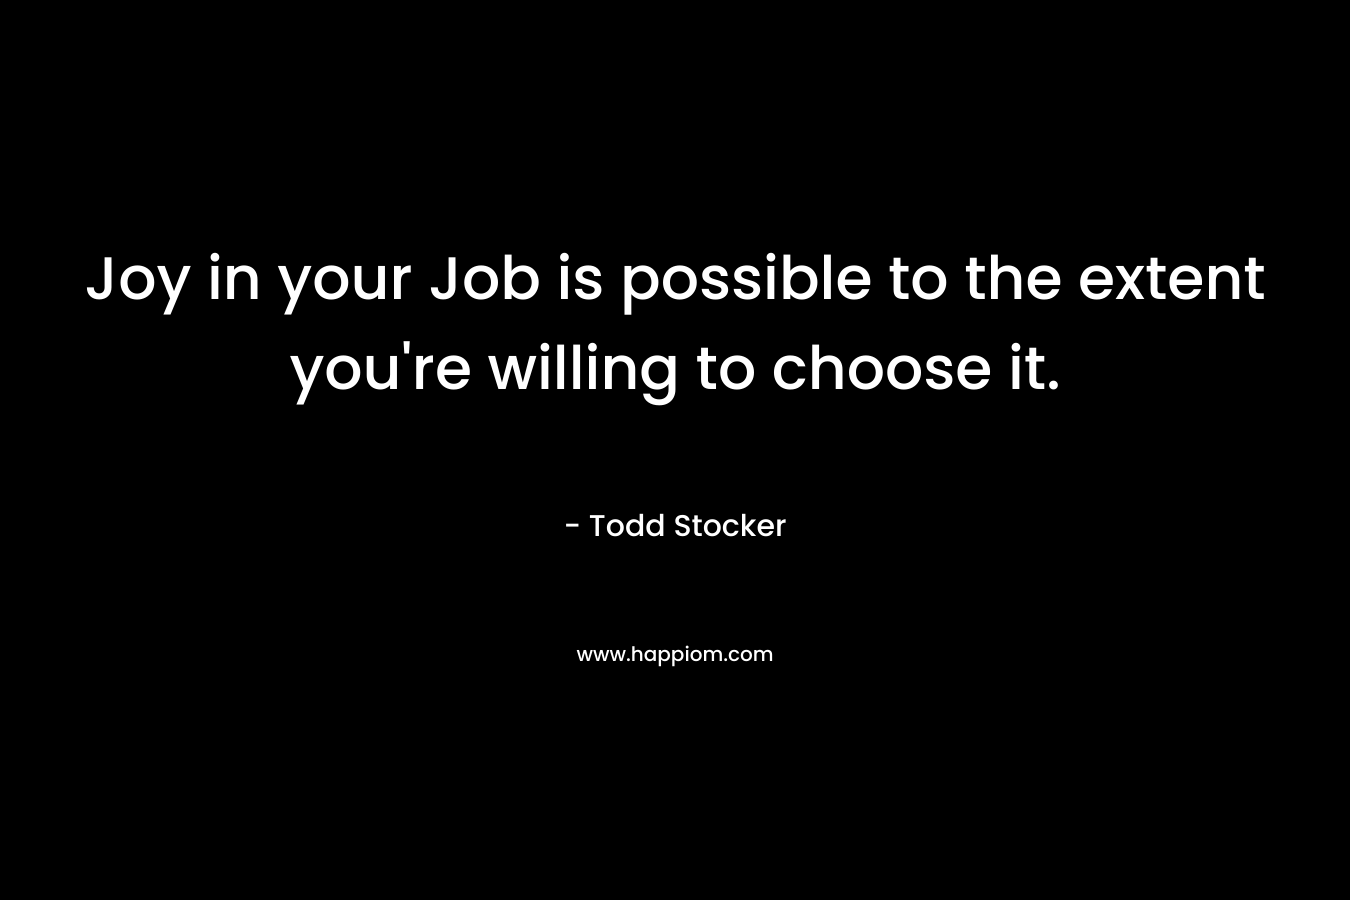 Joy in your Job is possible to the extent you're willing to choose it.